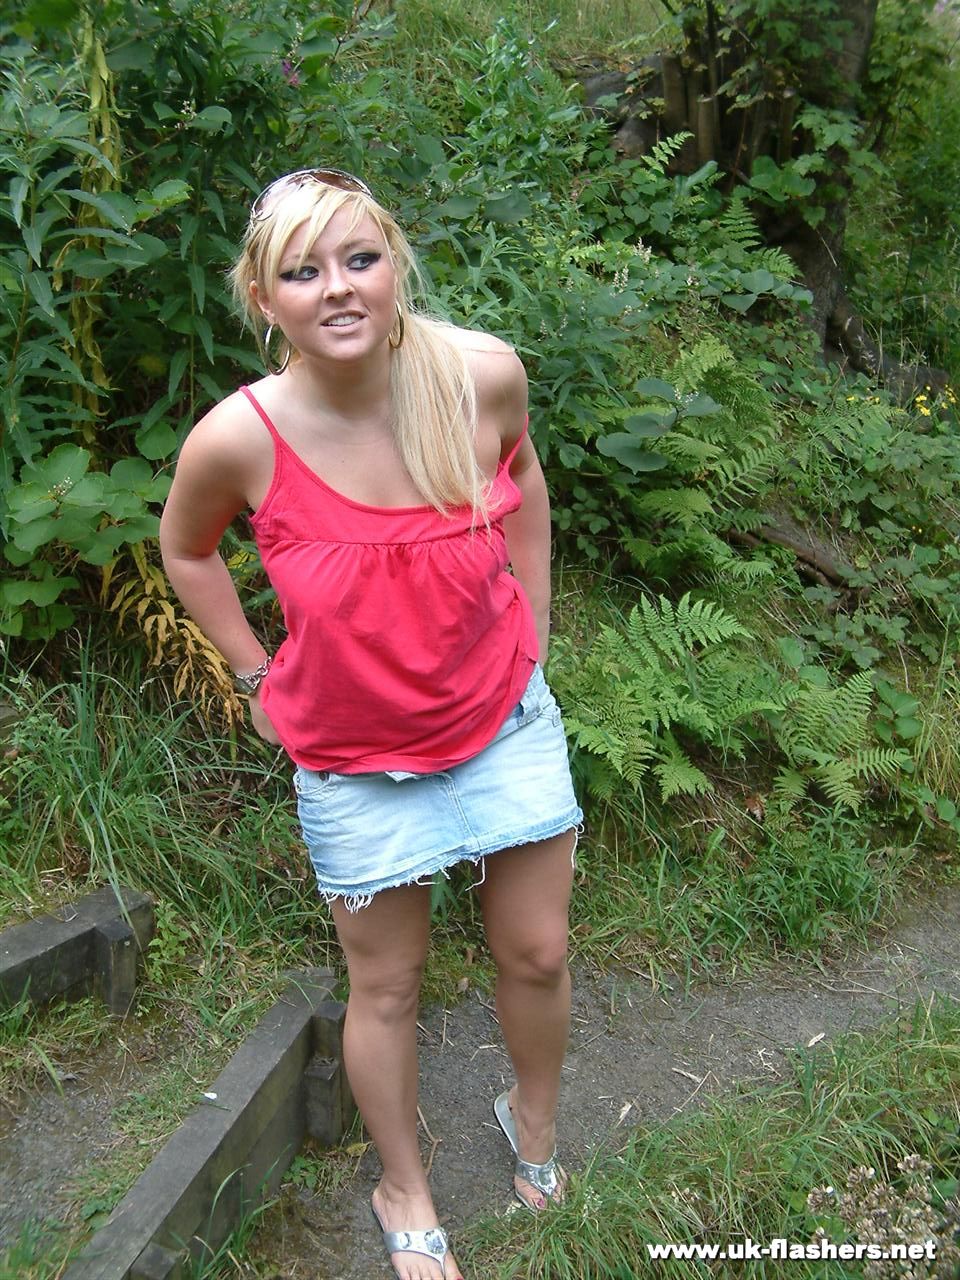 Overweight UK female with blonde hair strips naked on a popular walking trails porn photo #428197328 | UK Flashers Pics, Lena Leigh, Public, mobile porn